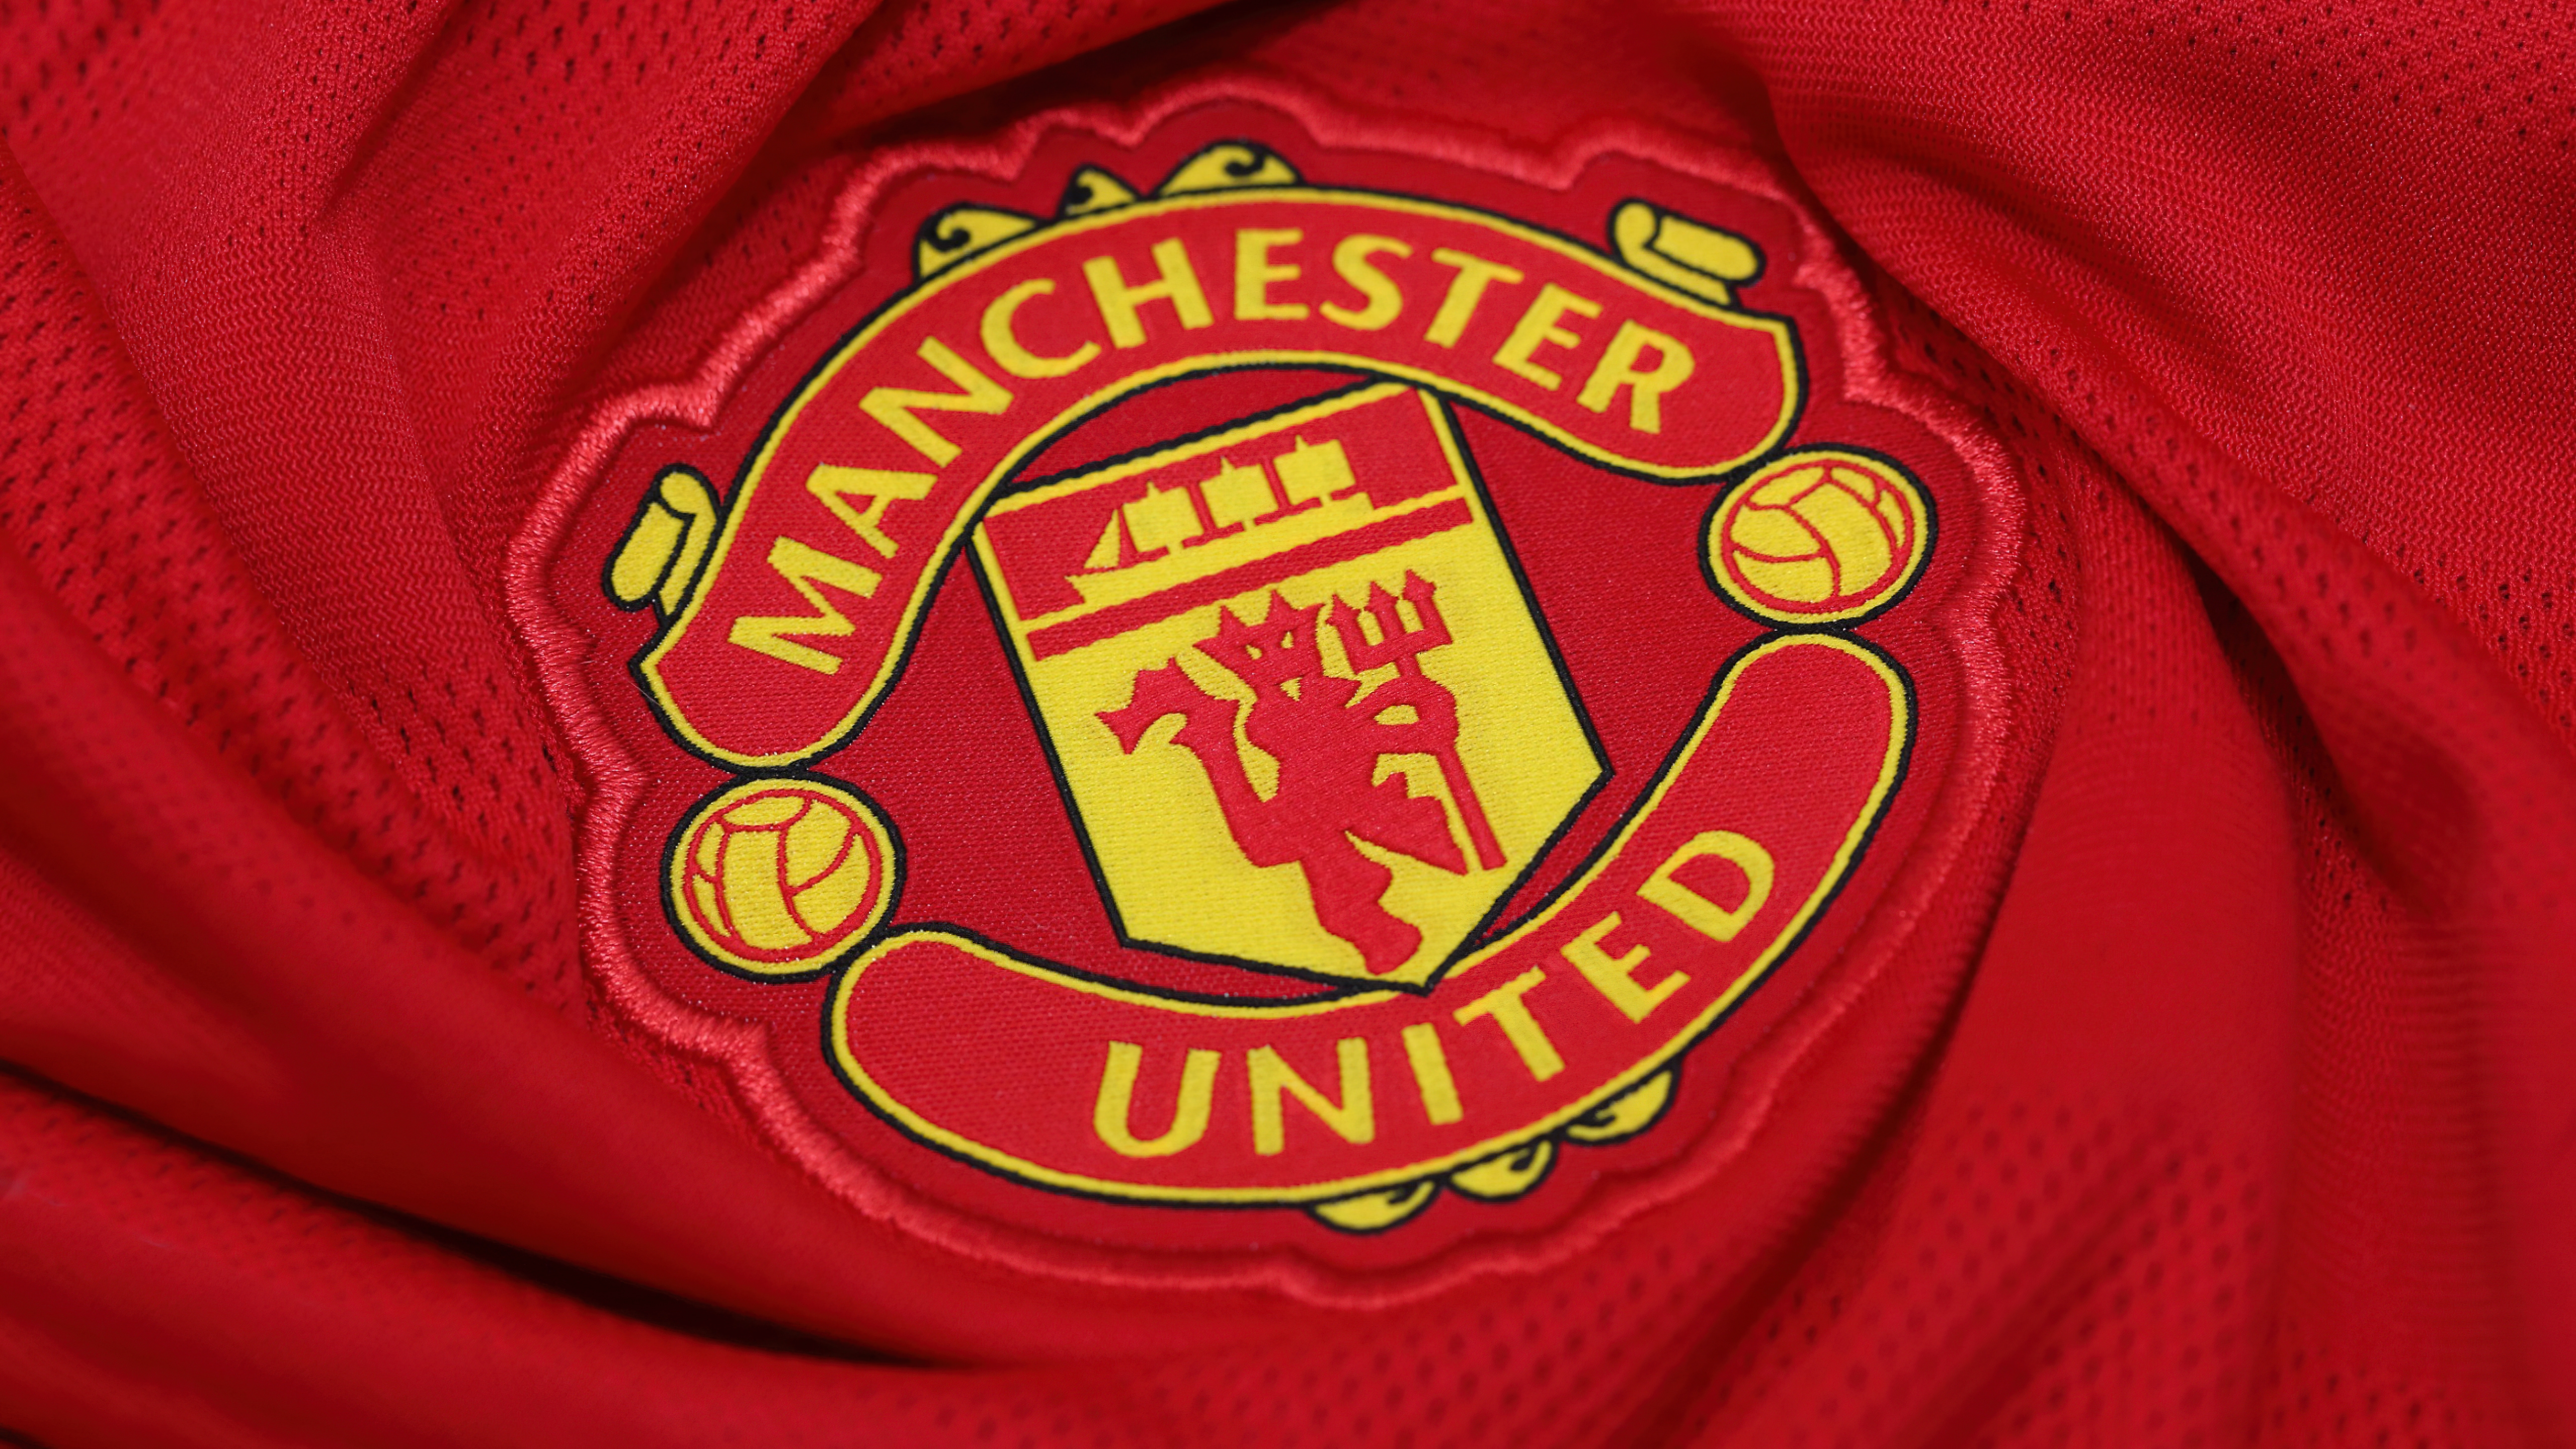 HD wallpaper, Football Club, 5K, Manchester United, Logo, Red Background